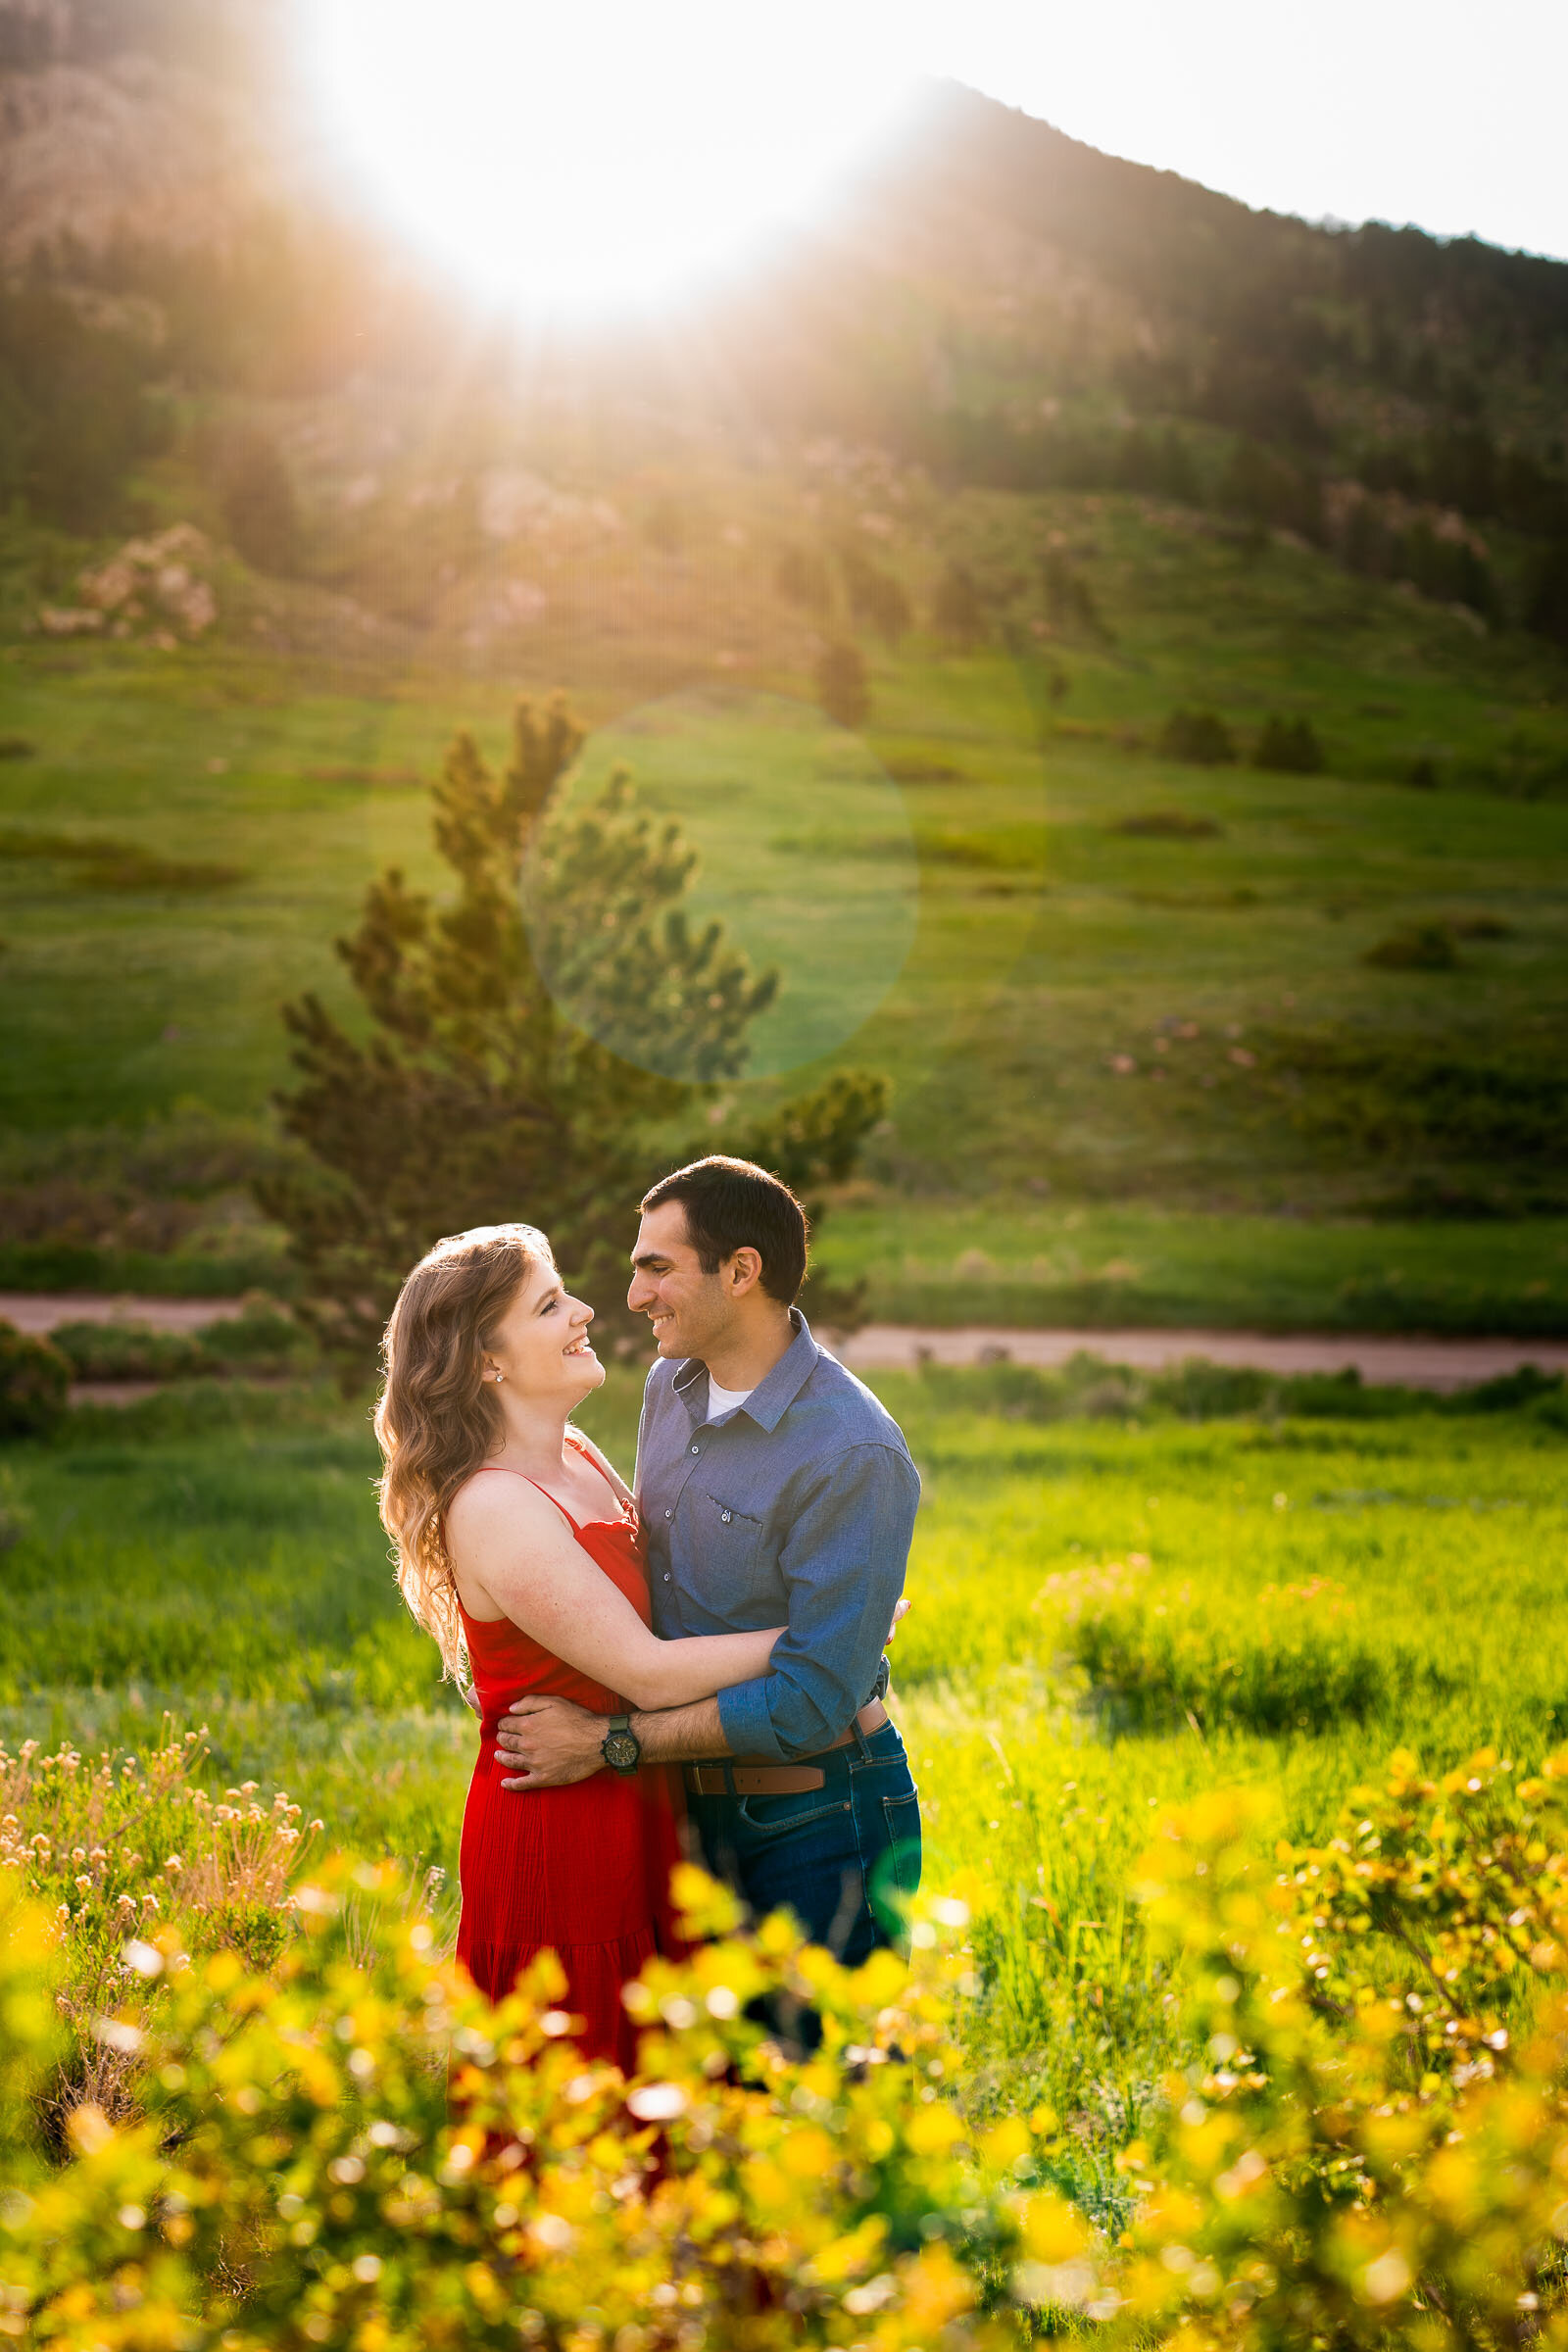 Engaged couple embraces in a luscious green landscape of rolling foothills during golden hour, Engagement Photos, Engagement Photo Inspiration, Engagement Photography, Engagement Photographer, Spring Engagement Photos, Fort Collins Engagement Photos, Fort Collins engagement photos, Fort Collins engagement photography, Fort Collins engagement photographer, Colorado engagement photos, Colorado engagement photography, Colorado engagement inspiration, Horsetooth Reservoir Engagement